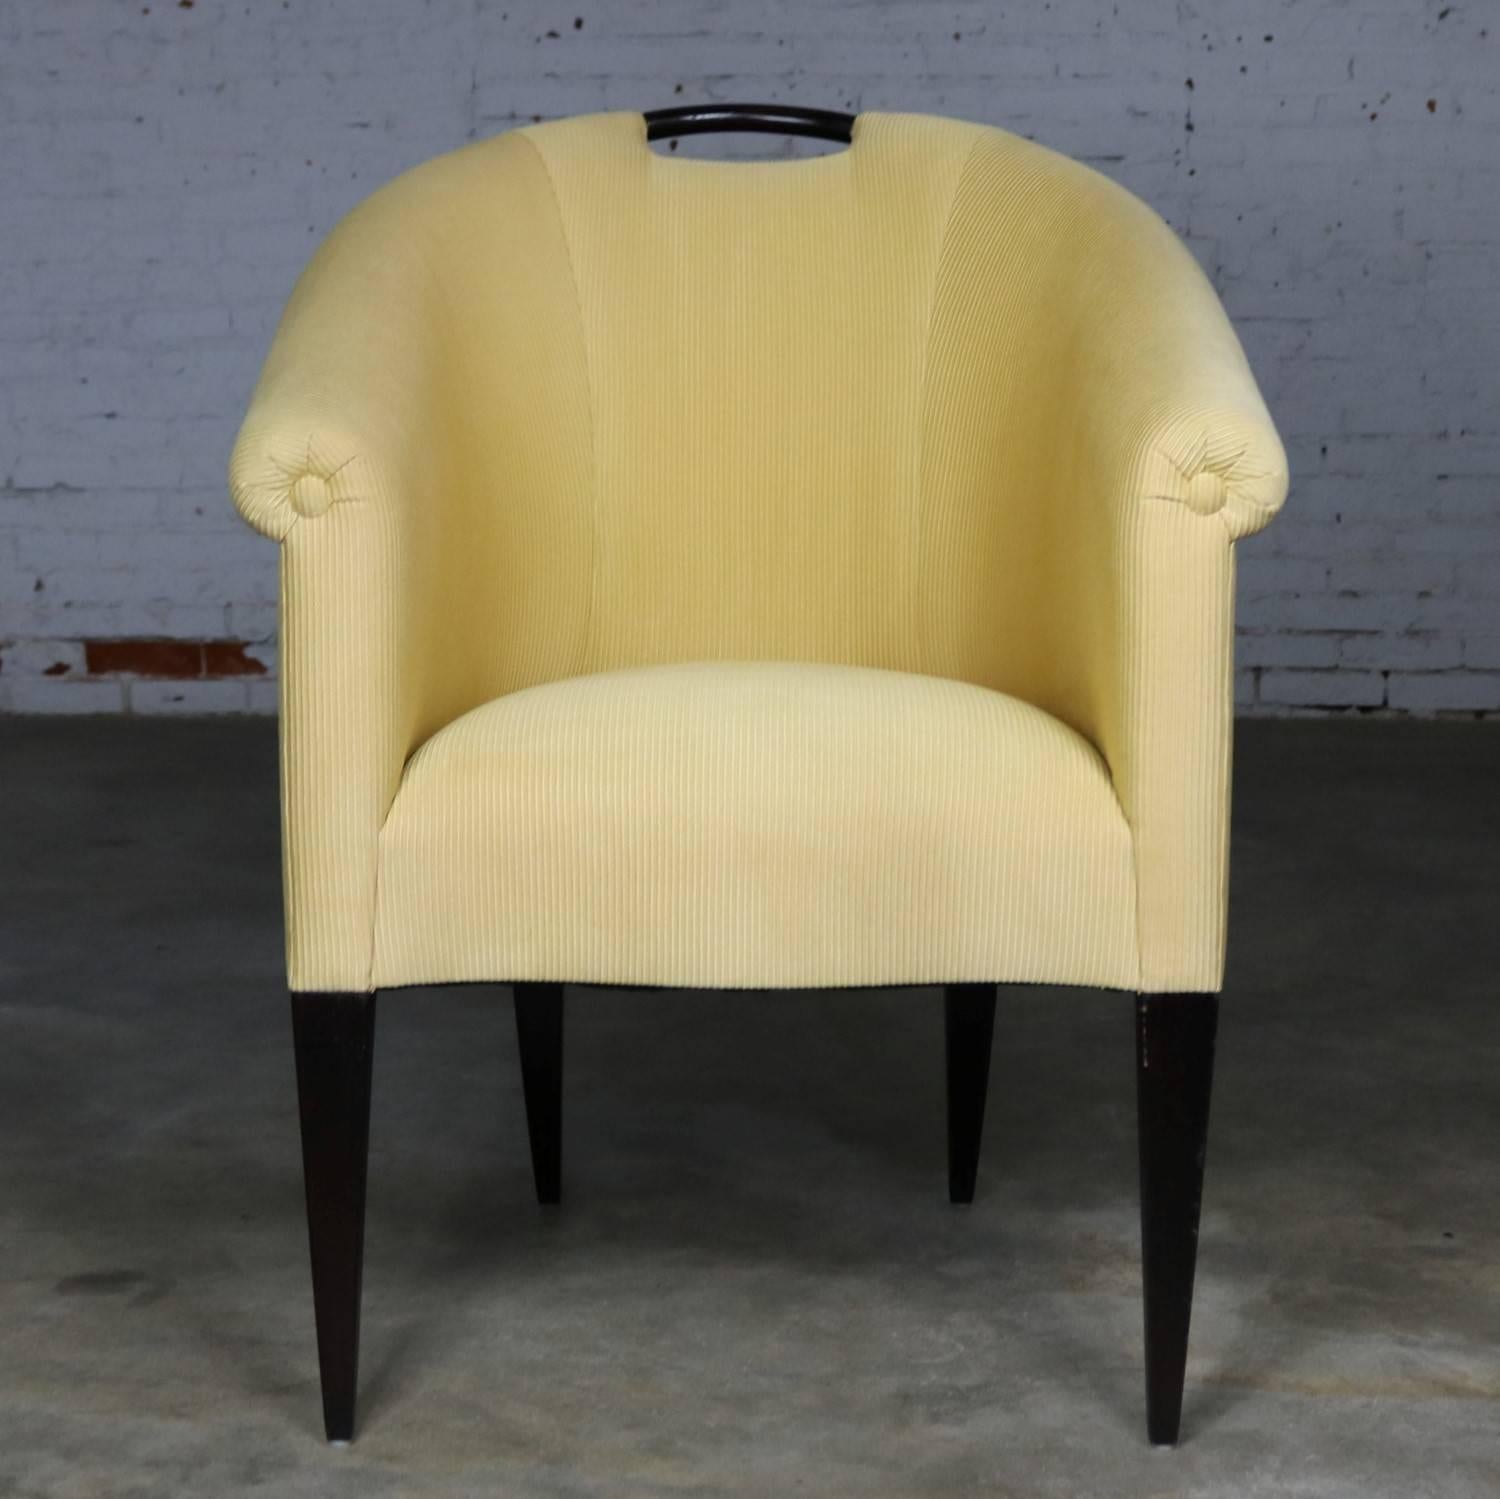 Incredible vintage Donghia barrel shaped armchair in yellow-gold corded upholstery and ebonized tapered legs and handle designed by John Hutton. It is in fabulous vintage condition and ready to use, circa late 20th century.

Sensual and delicate